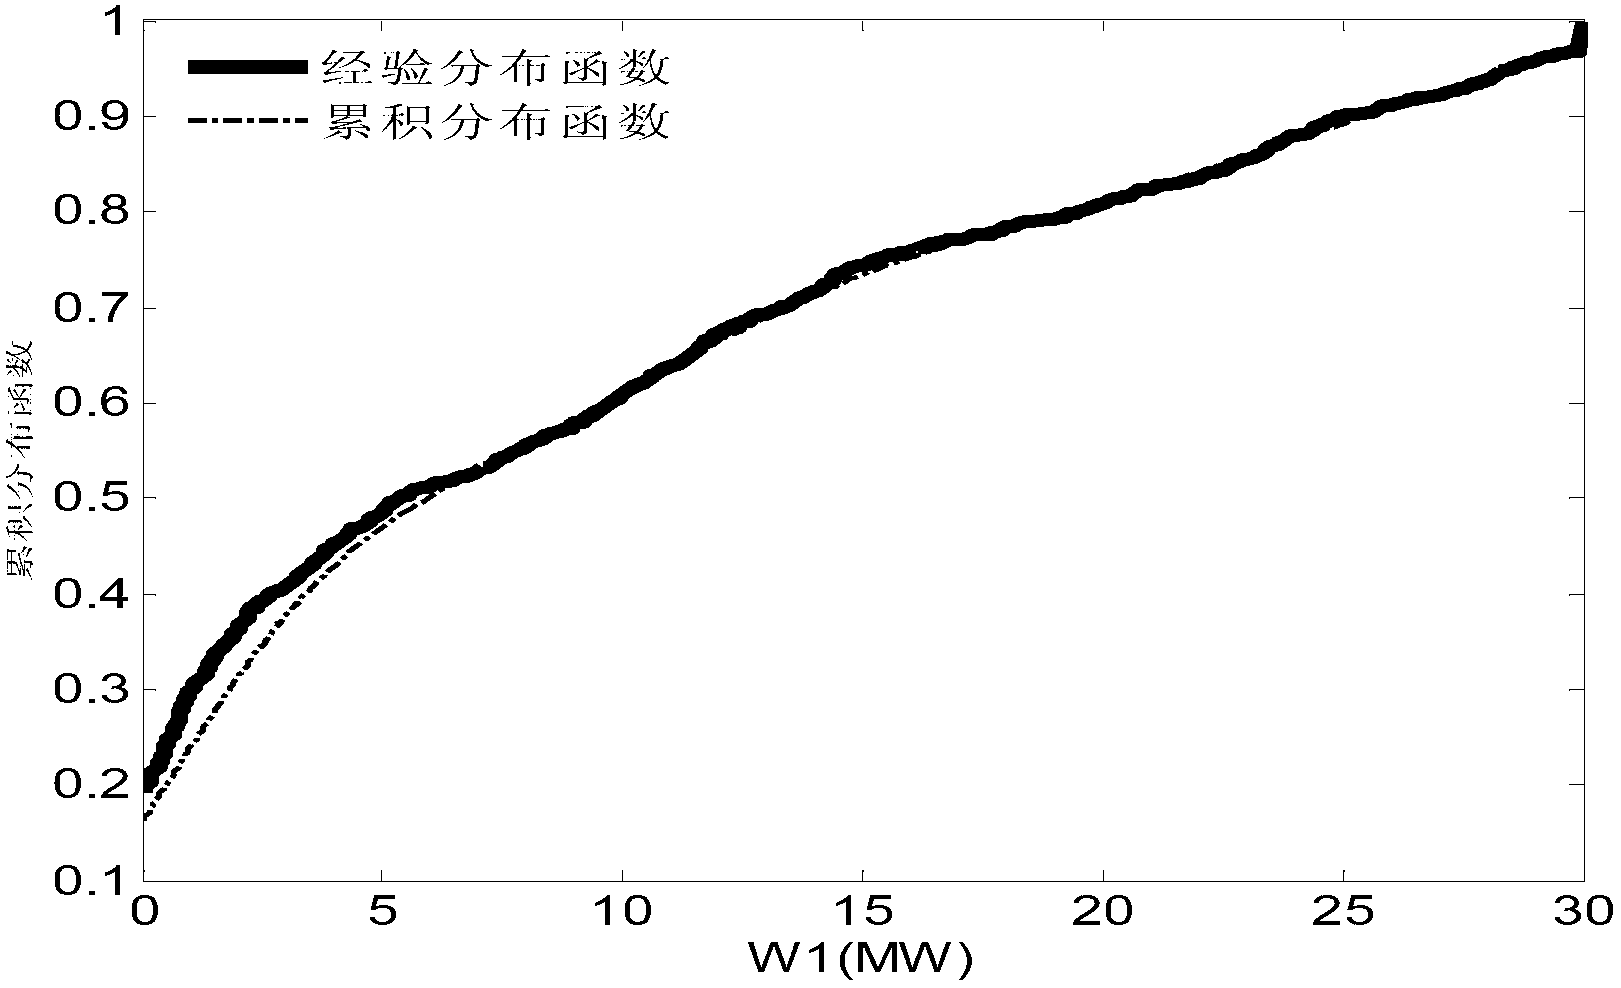 Copula-function-based method for acquiring relevant characteristic of wind power plant capacity